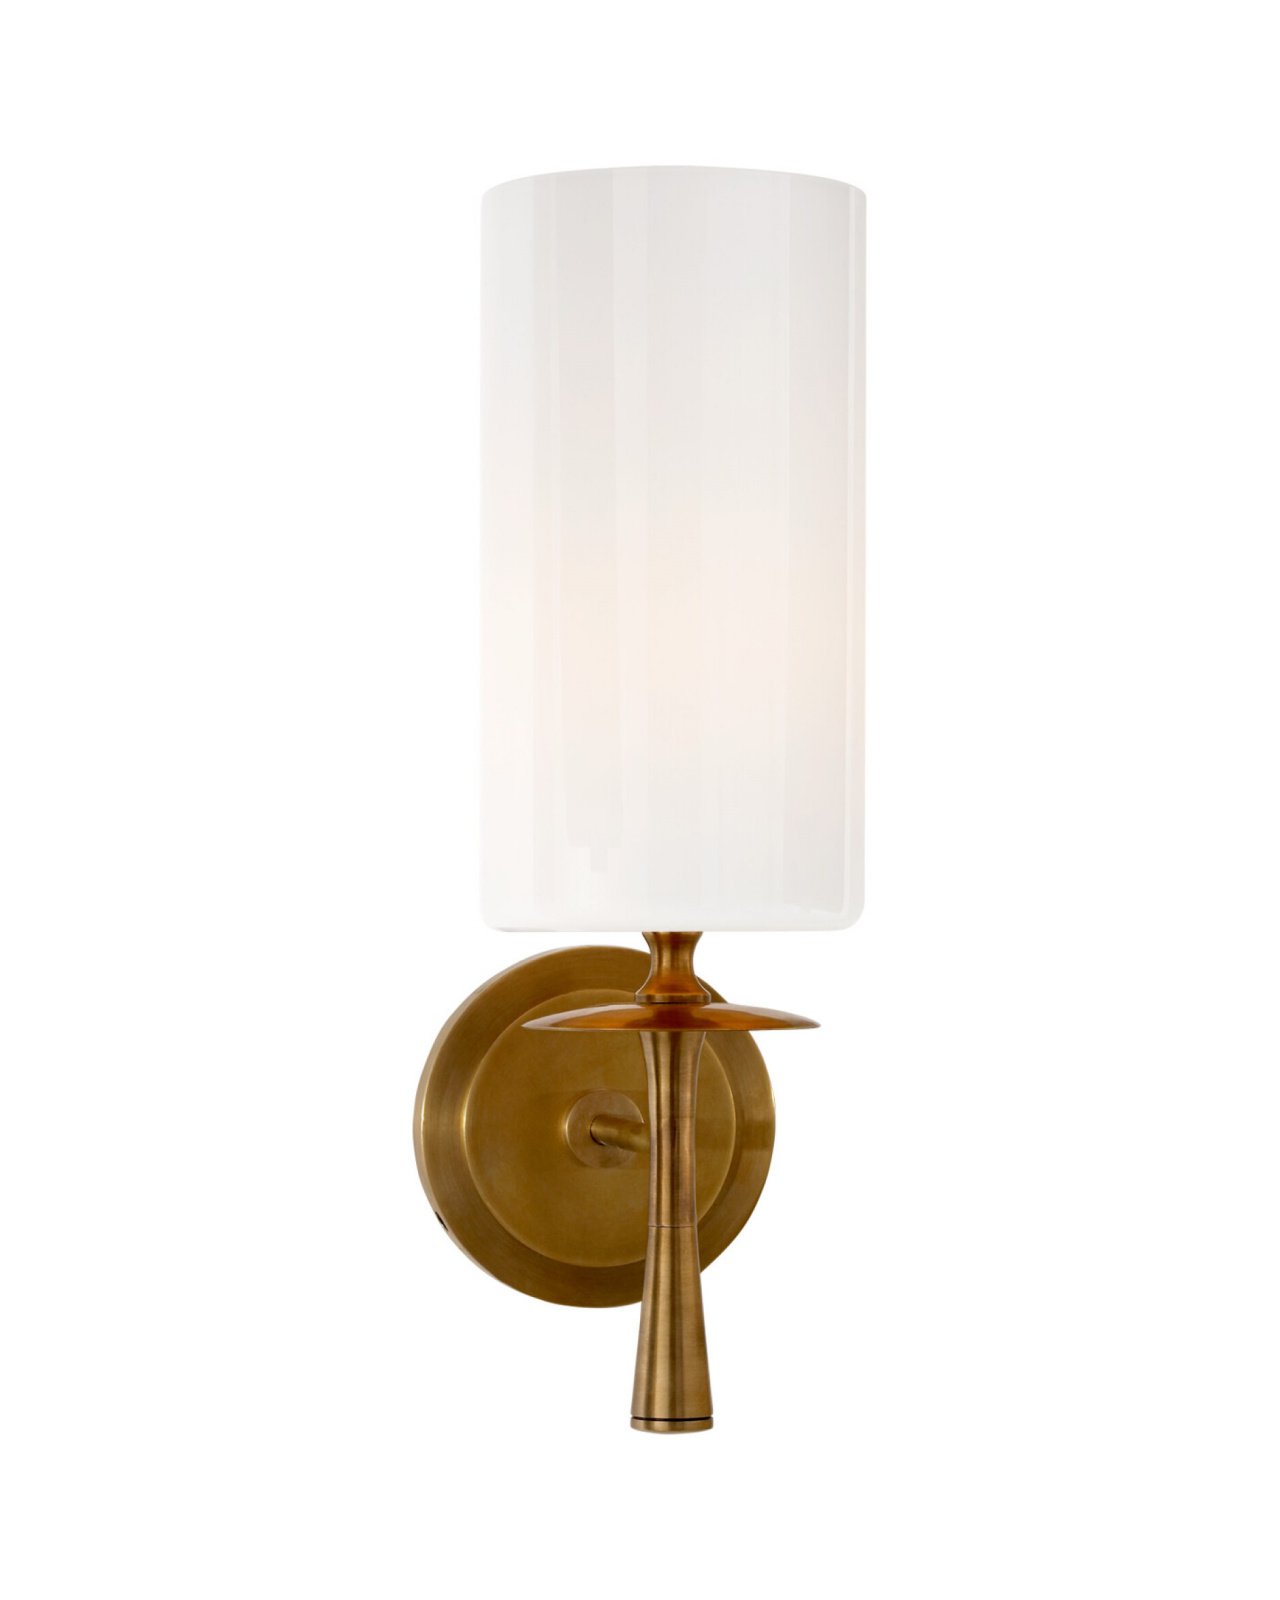 Drunmore Single Sconce Hand-Rubbed Antique Brass/White